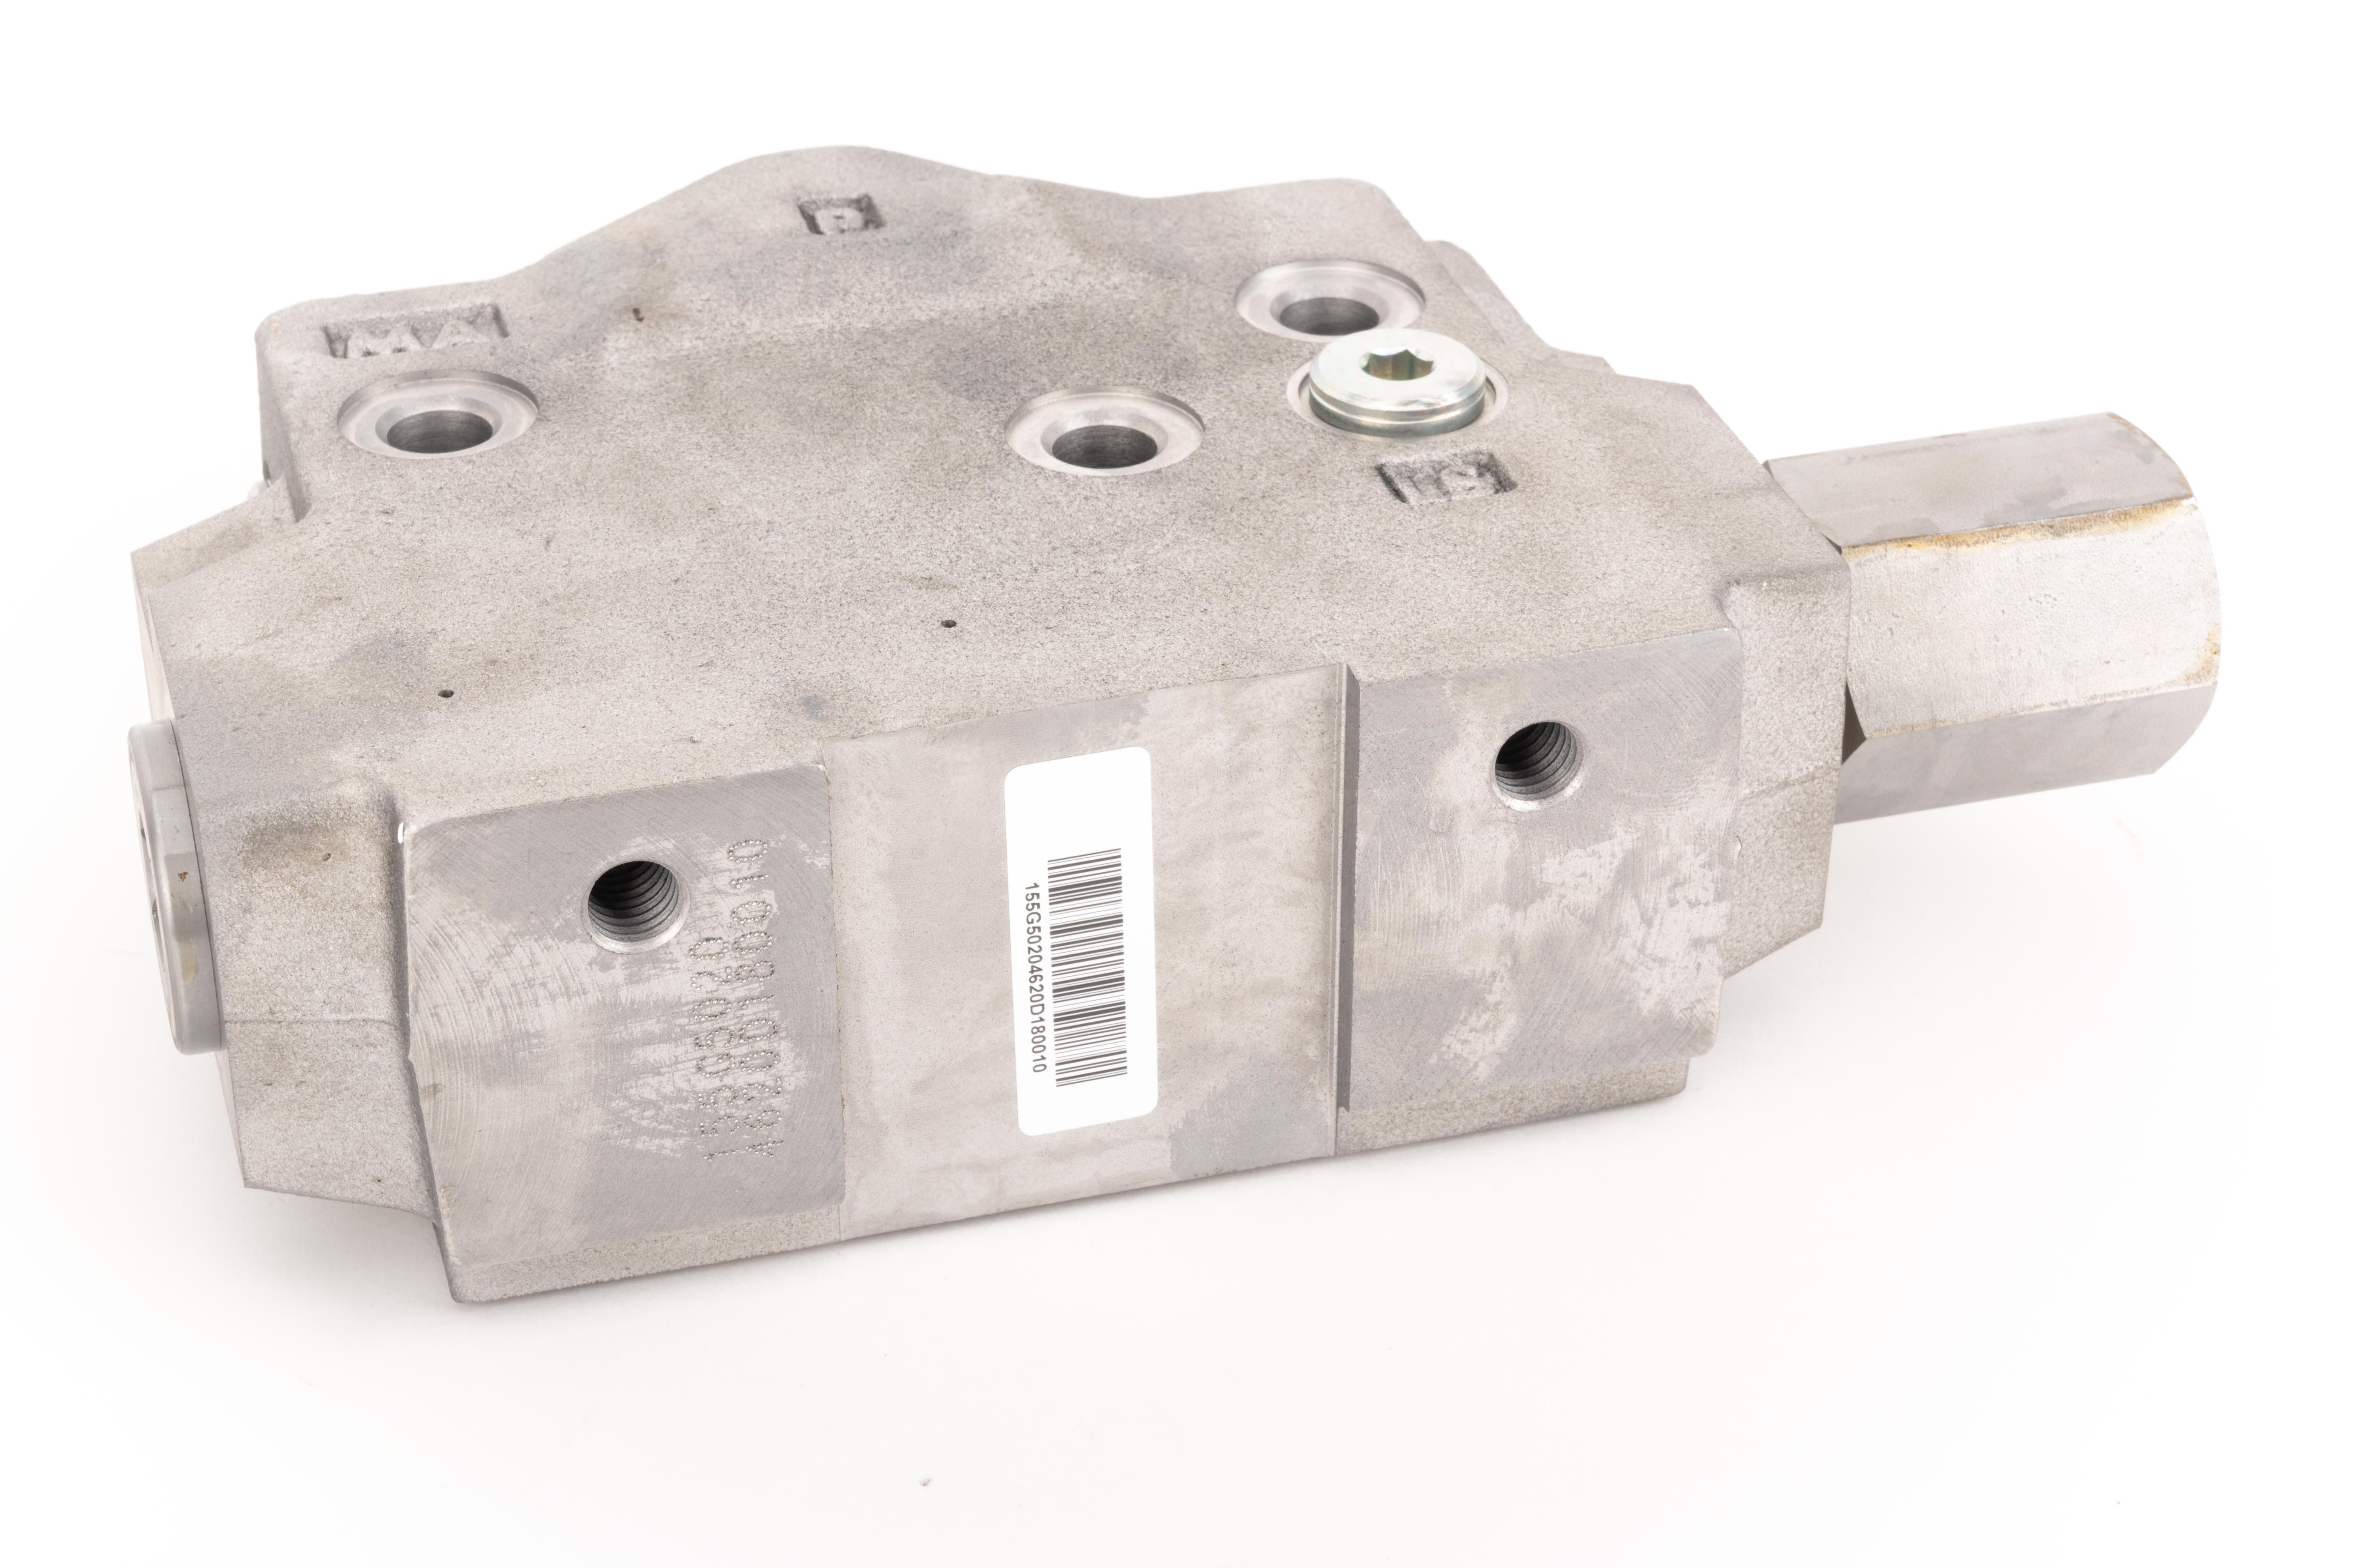 Danfoss 155G5020 PVP inlet module for variable displacement pumps